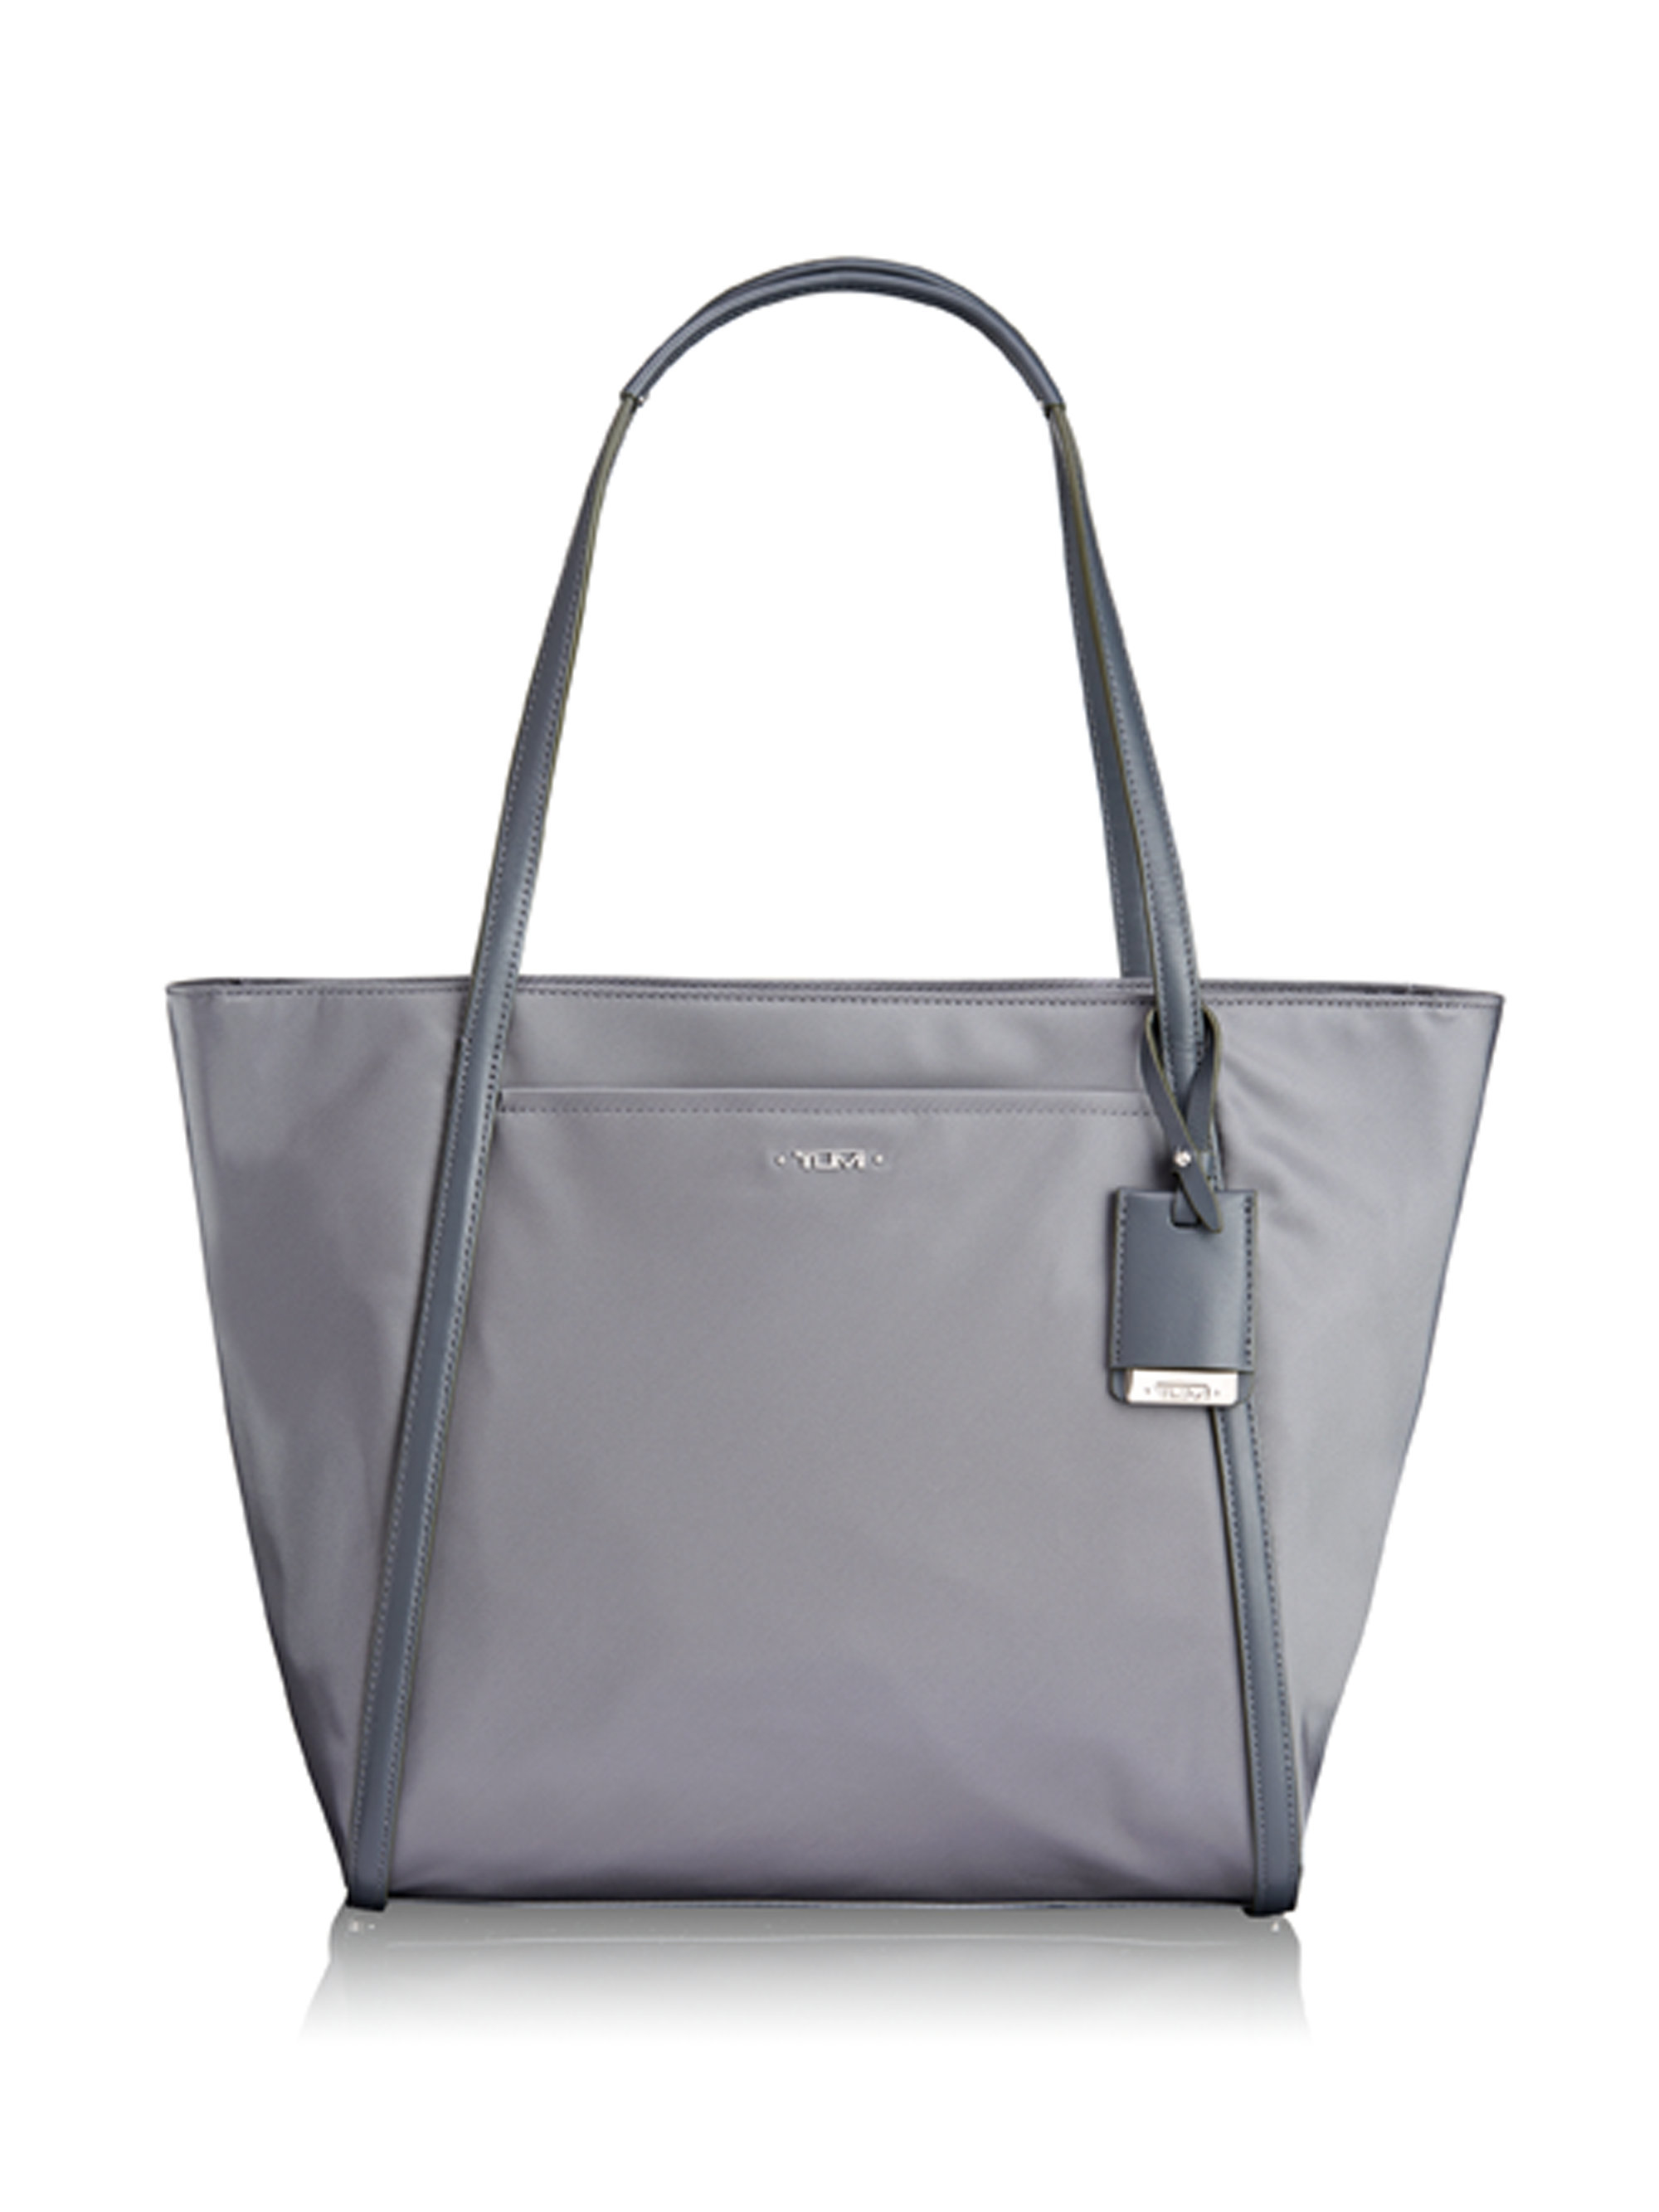 Tumi Synthetic Q Tote Bag in Stone (Gray) - Lyst